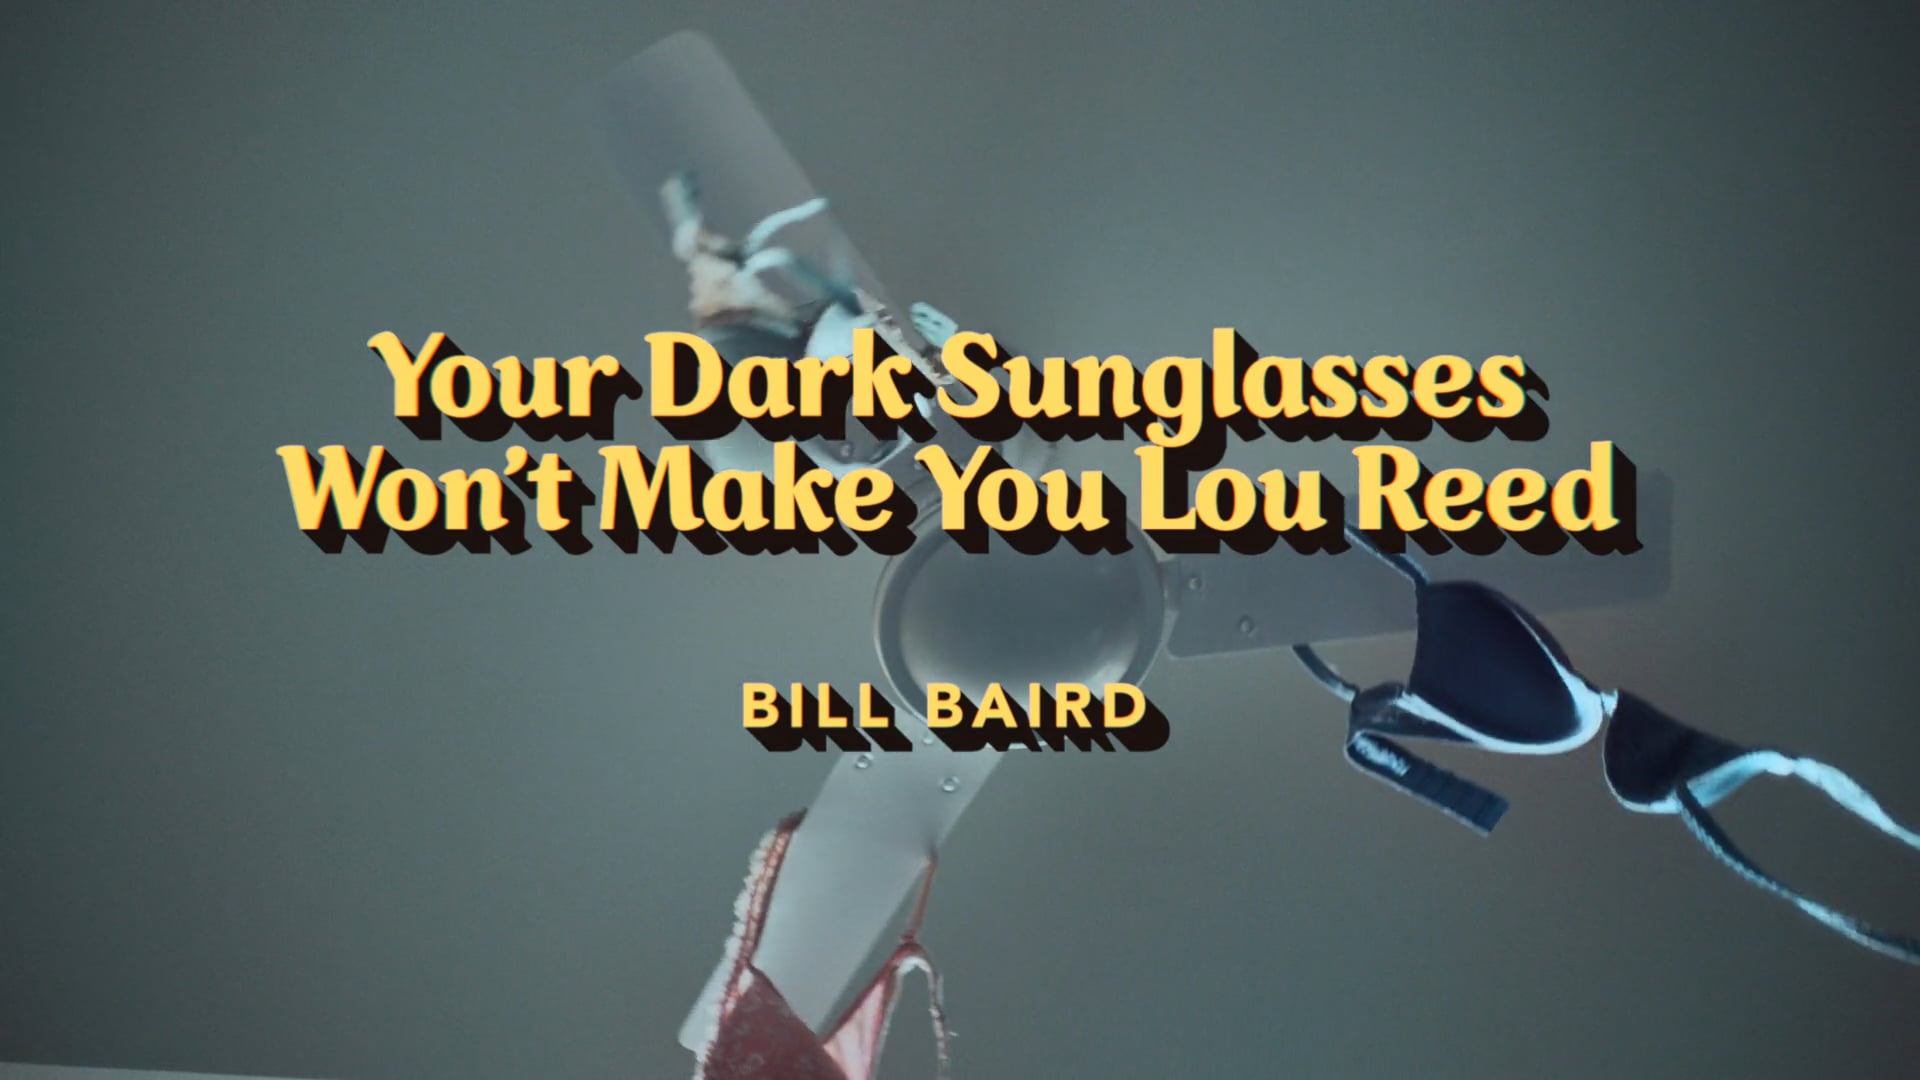 Your Dark Sunglasses Won’t Make You Lou Reed